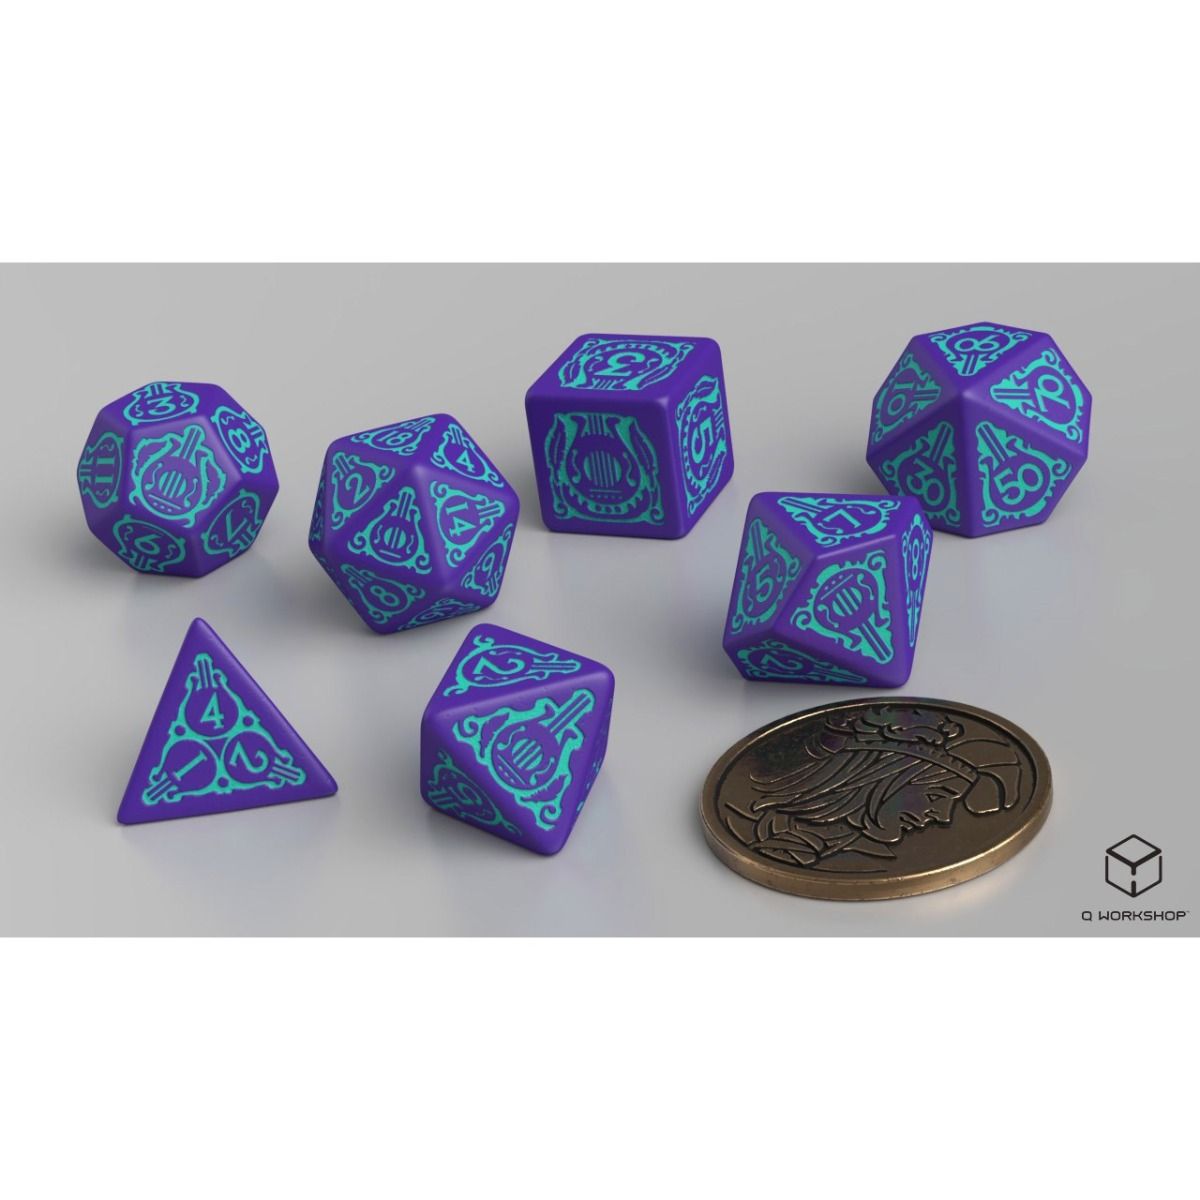 Q Workshop The Witcher Dice Set Dandelion - Half A Century Of Poetry Dice Set 7 With Coin